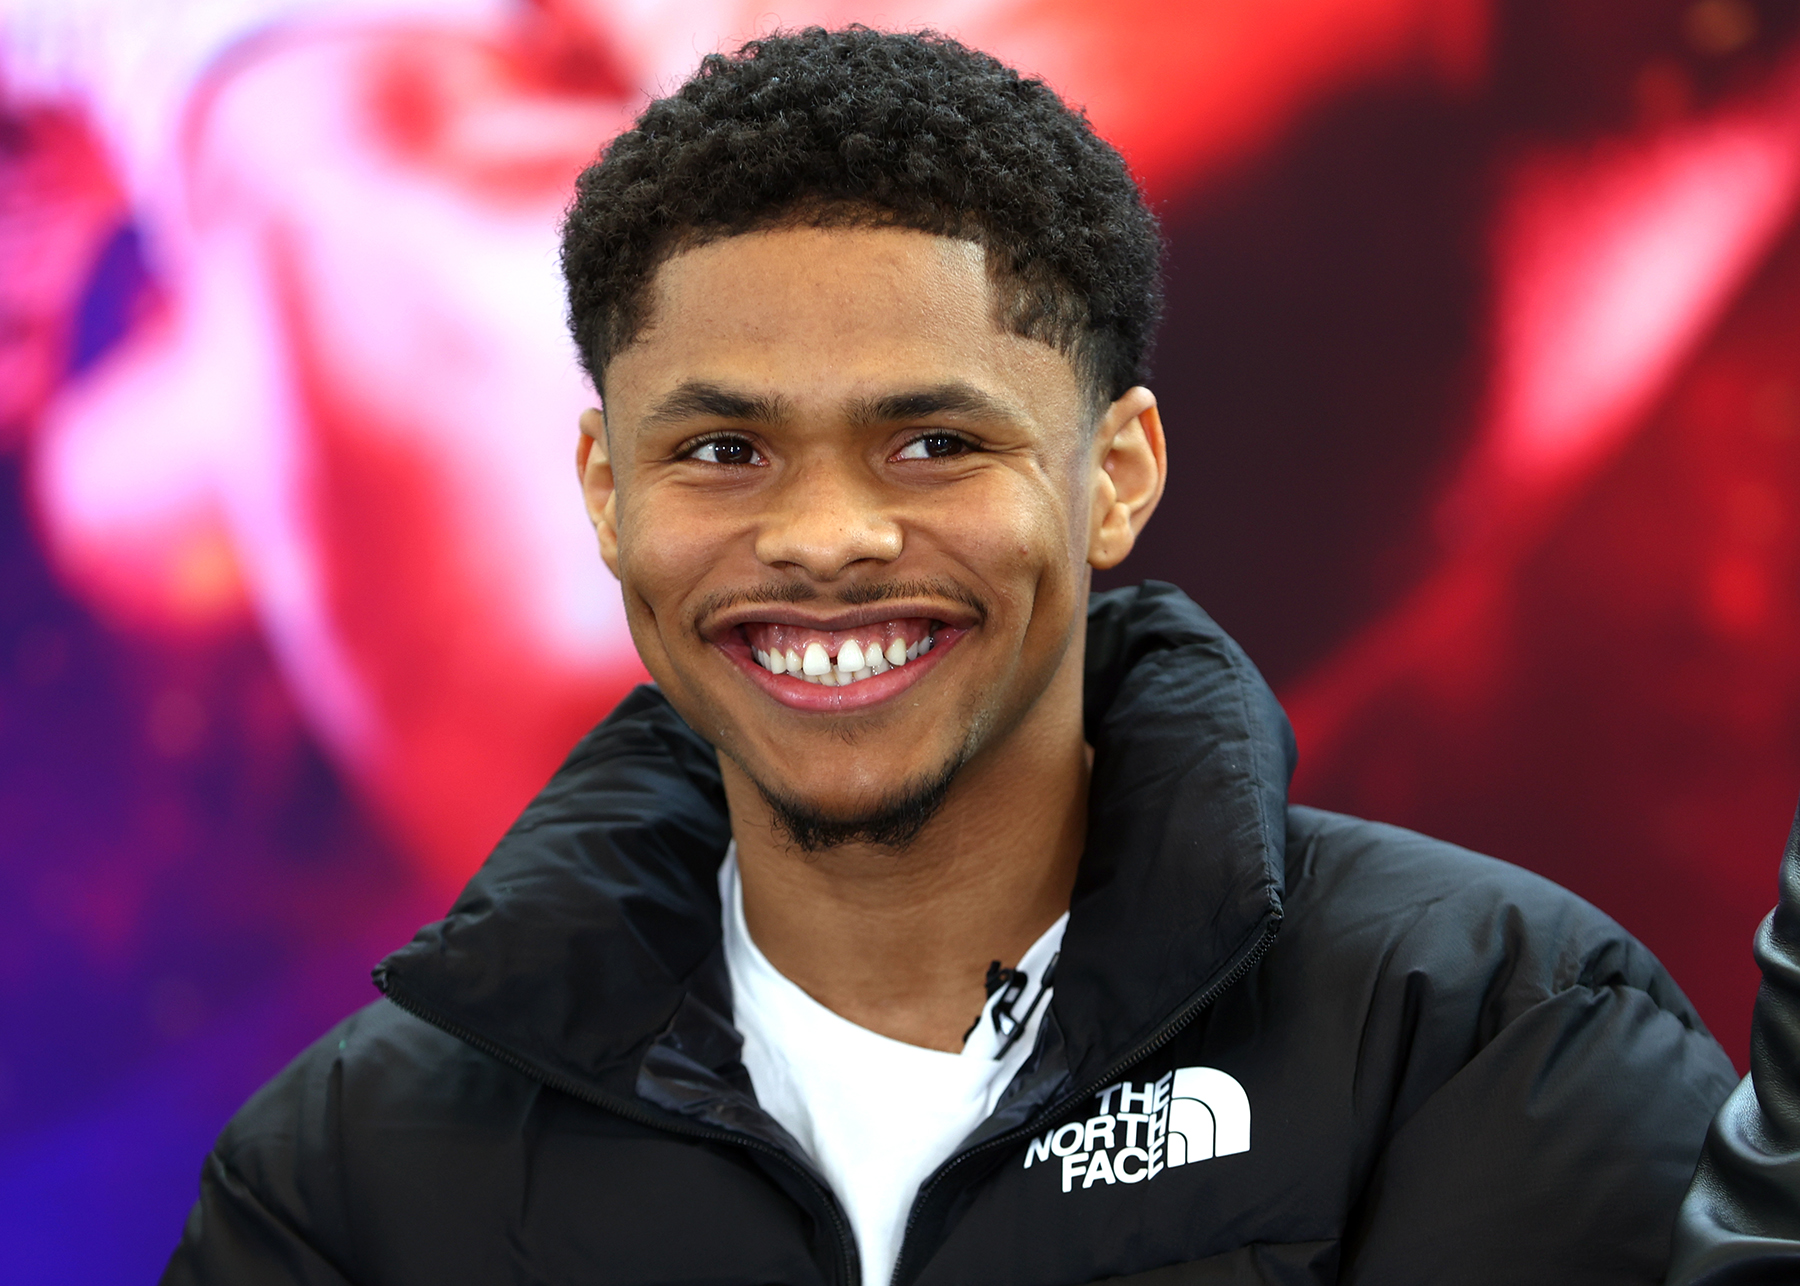 Shakur Stevenson Says He Will Fight Any Lightweight "I Think I am The Best Fighter"